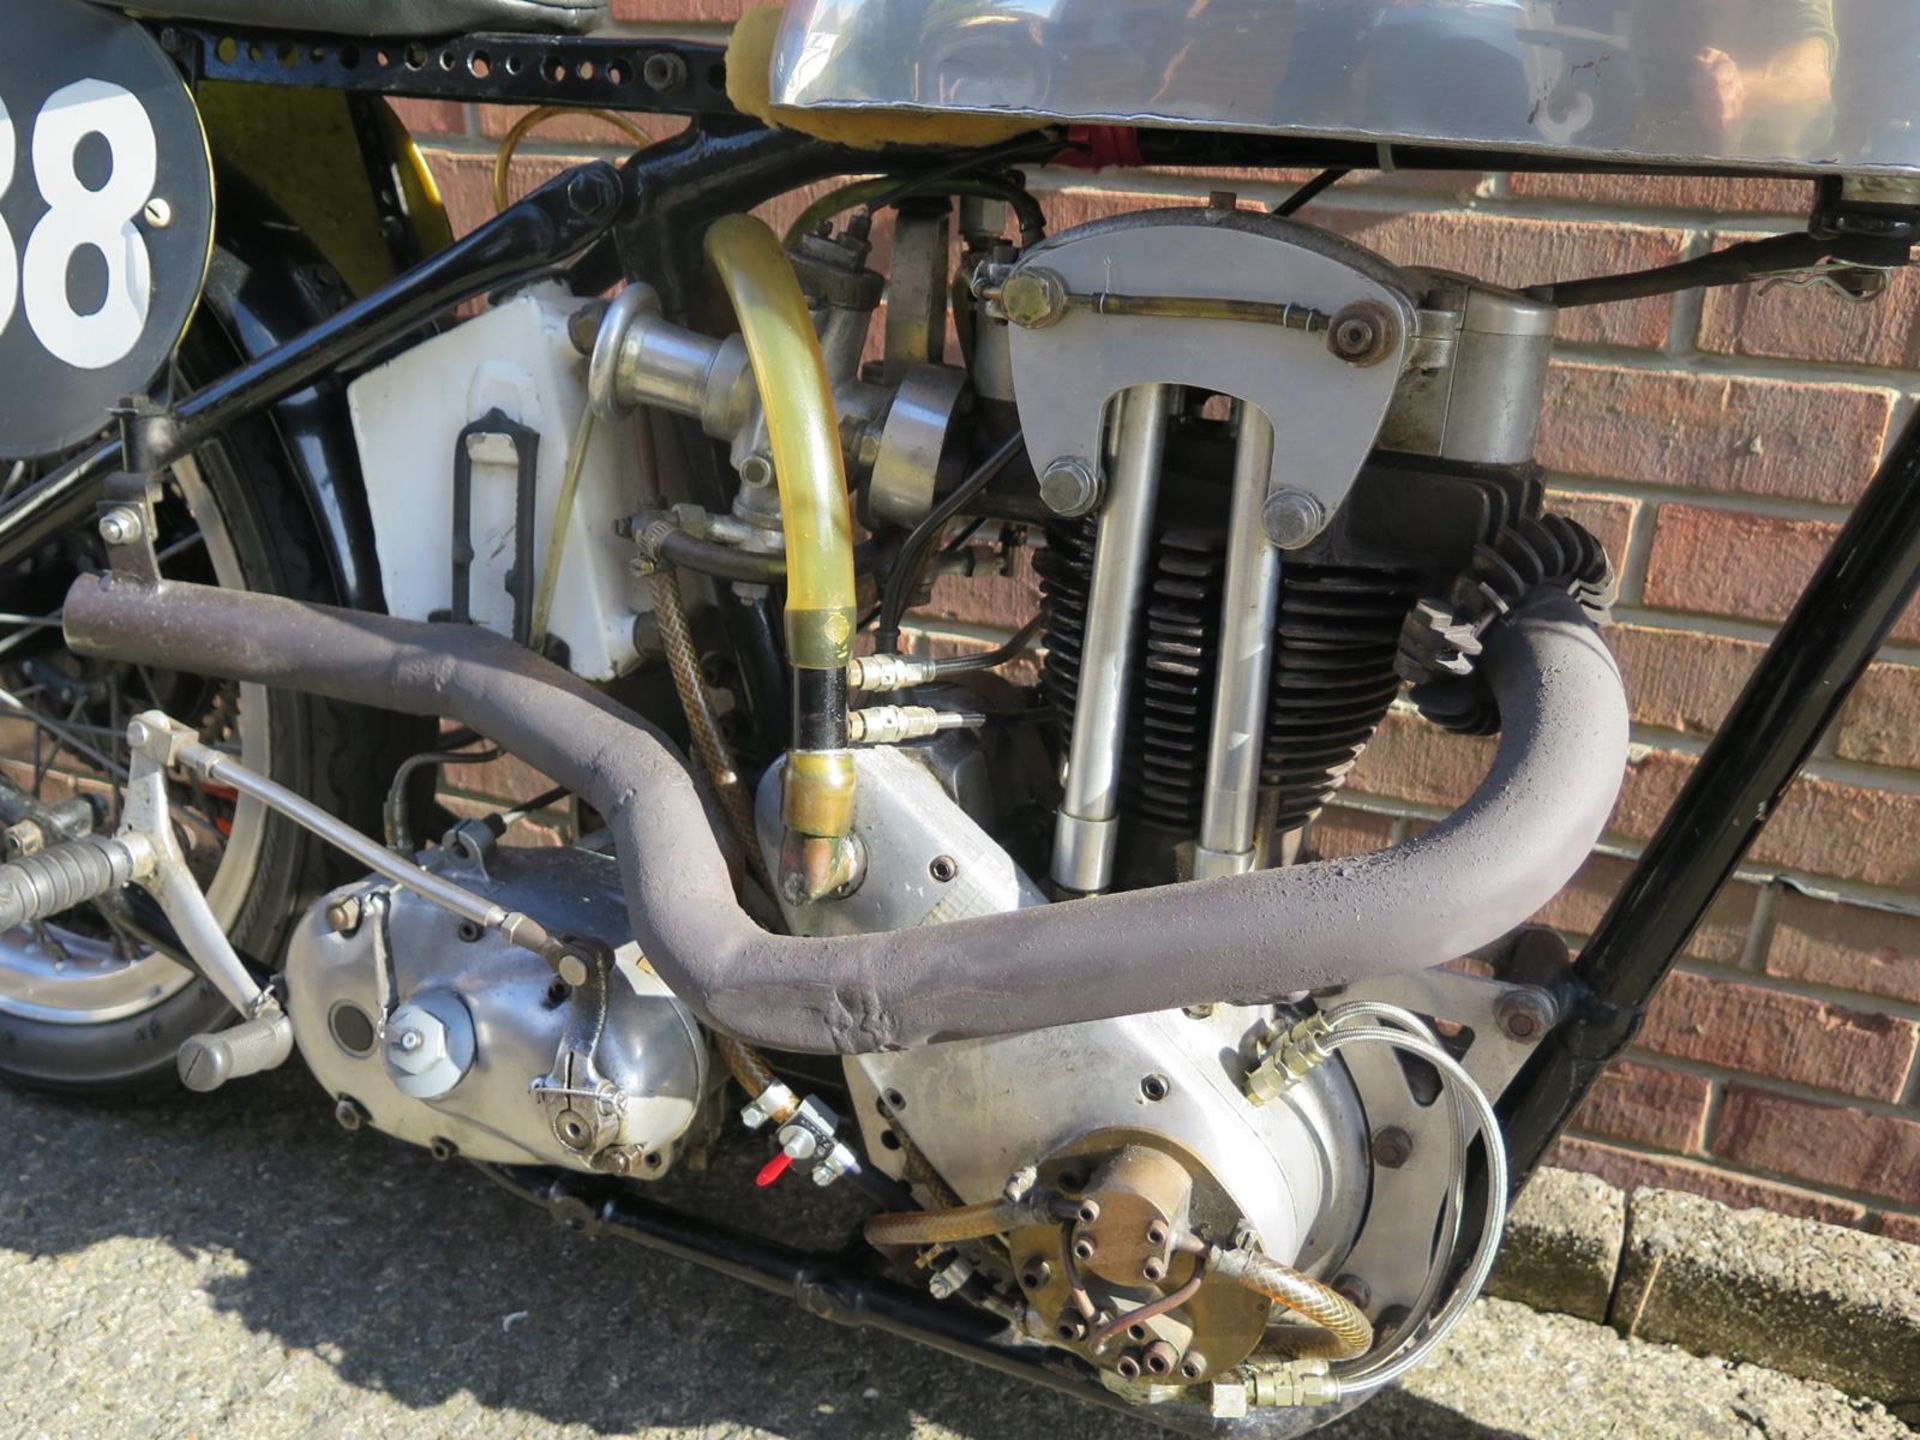 A 1937 Triumph Tiger 70 400 Purchased new in 1937 by Geoffrey Pollard Later converted for racing - Image 6 of 6